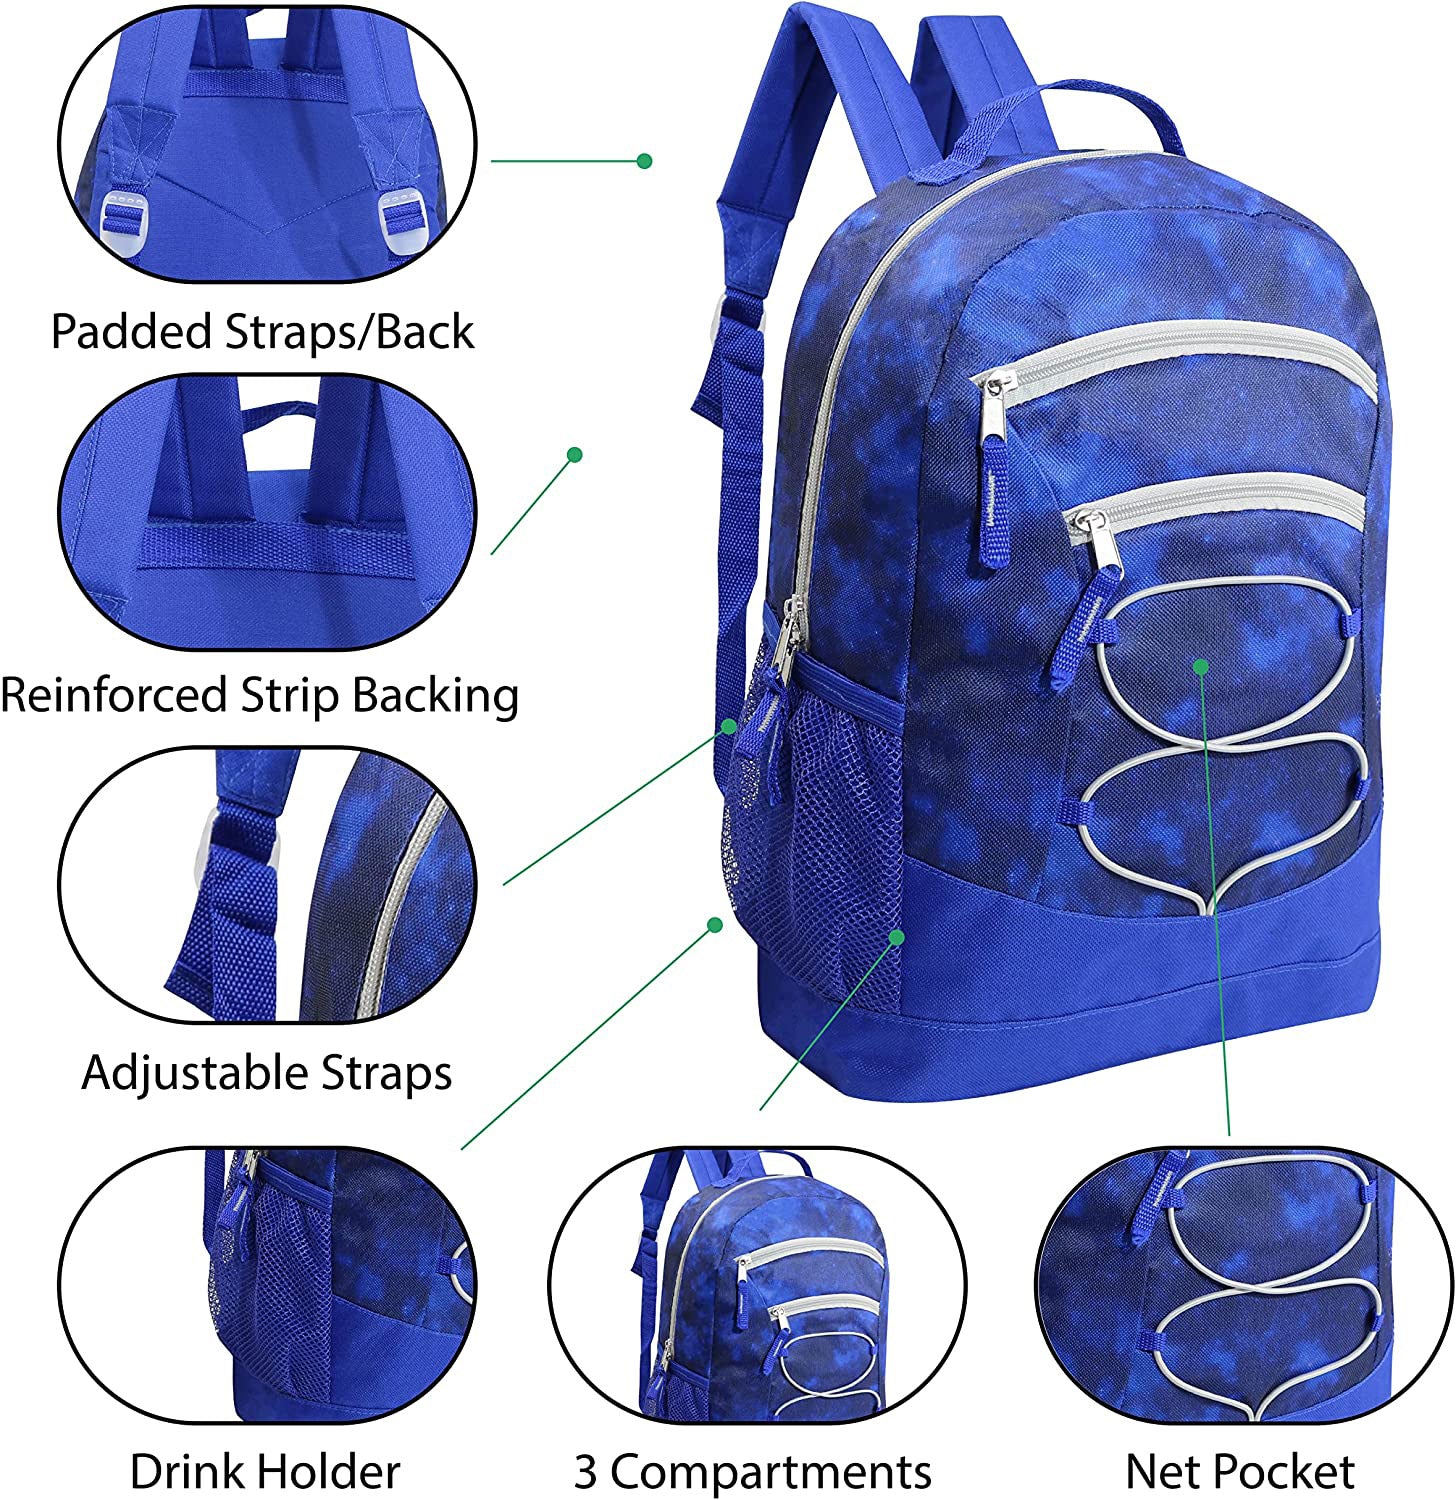 18 Piece Wholesale Bungee School Supply Kit With 17" Backpack - Bulk Case of 8 Backpacks and Kits